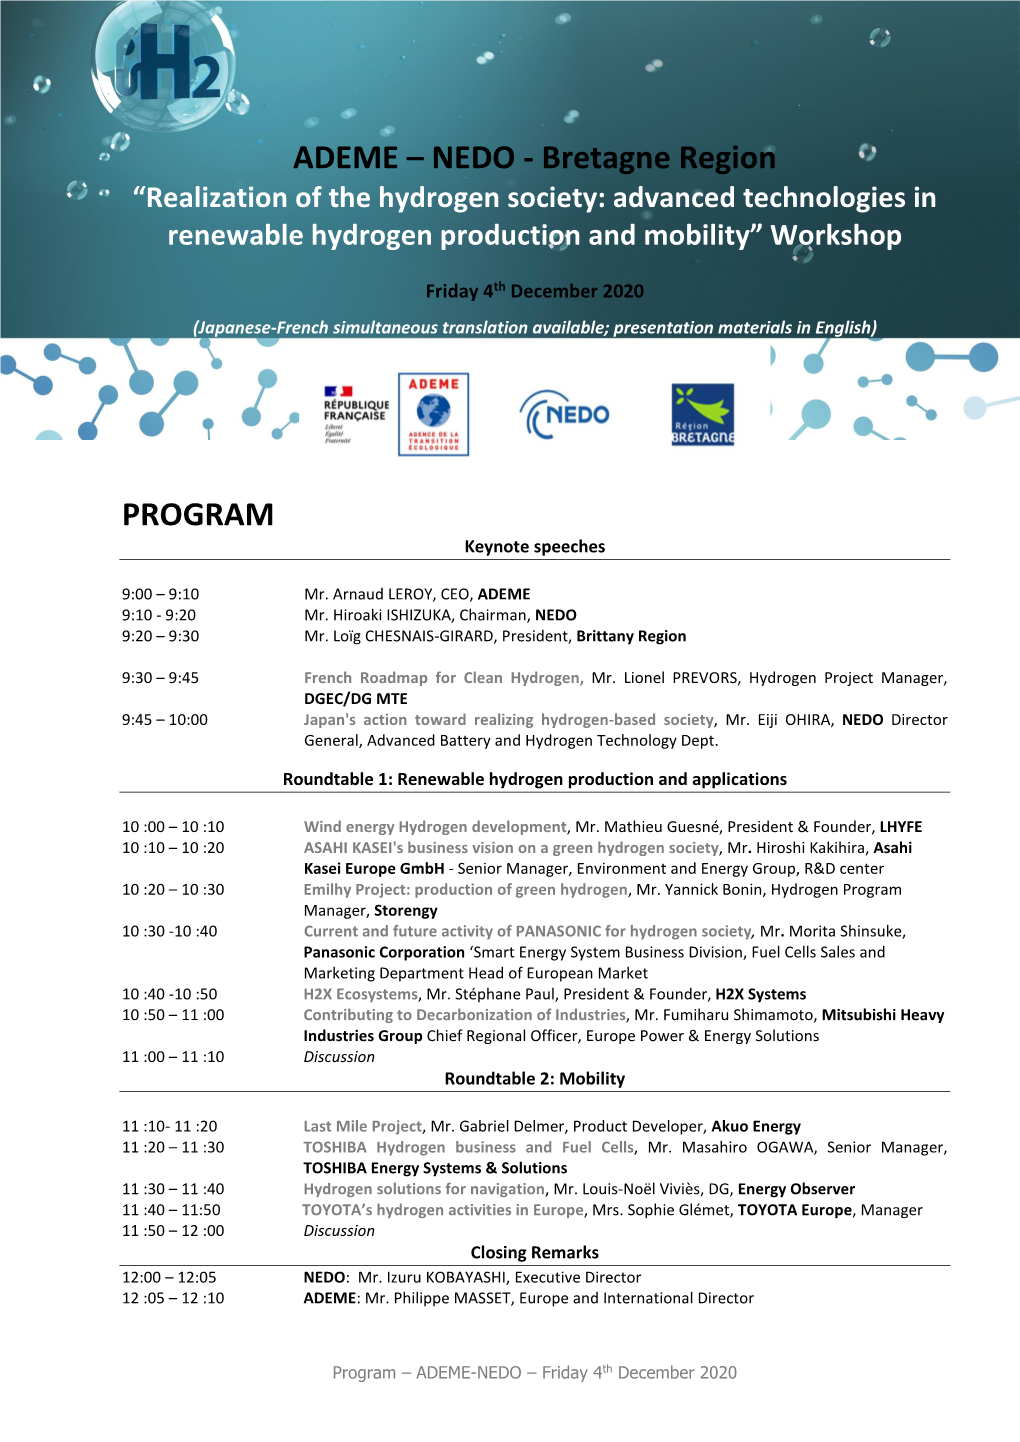 ADEME – NEDO - Bretagne Region “Realization of the Hydrogen Society: Advanced Technologies in Renewable Hydrogen Production and Mobility” Workshop